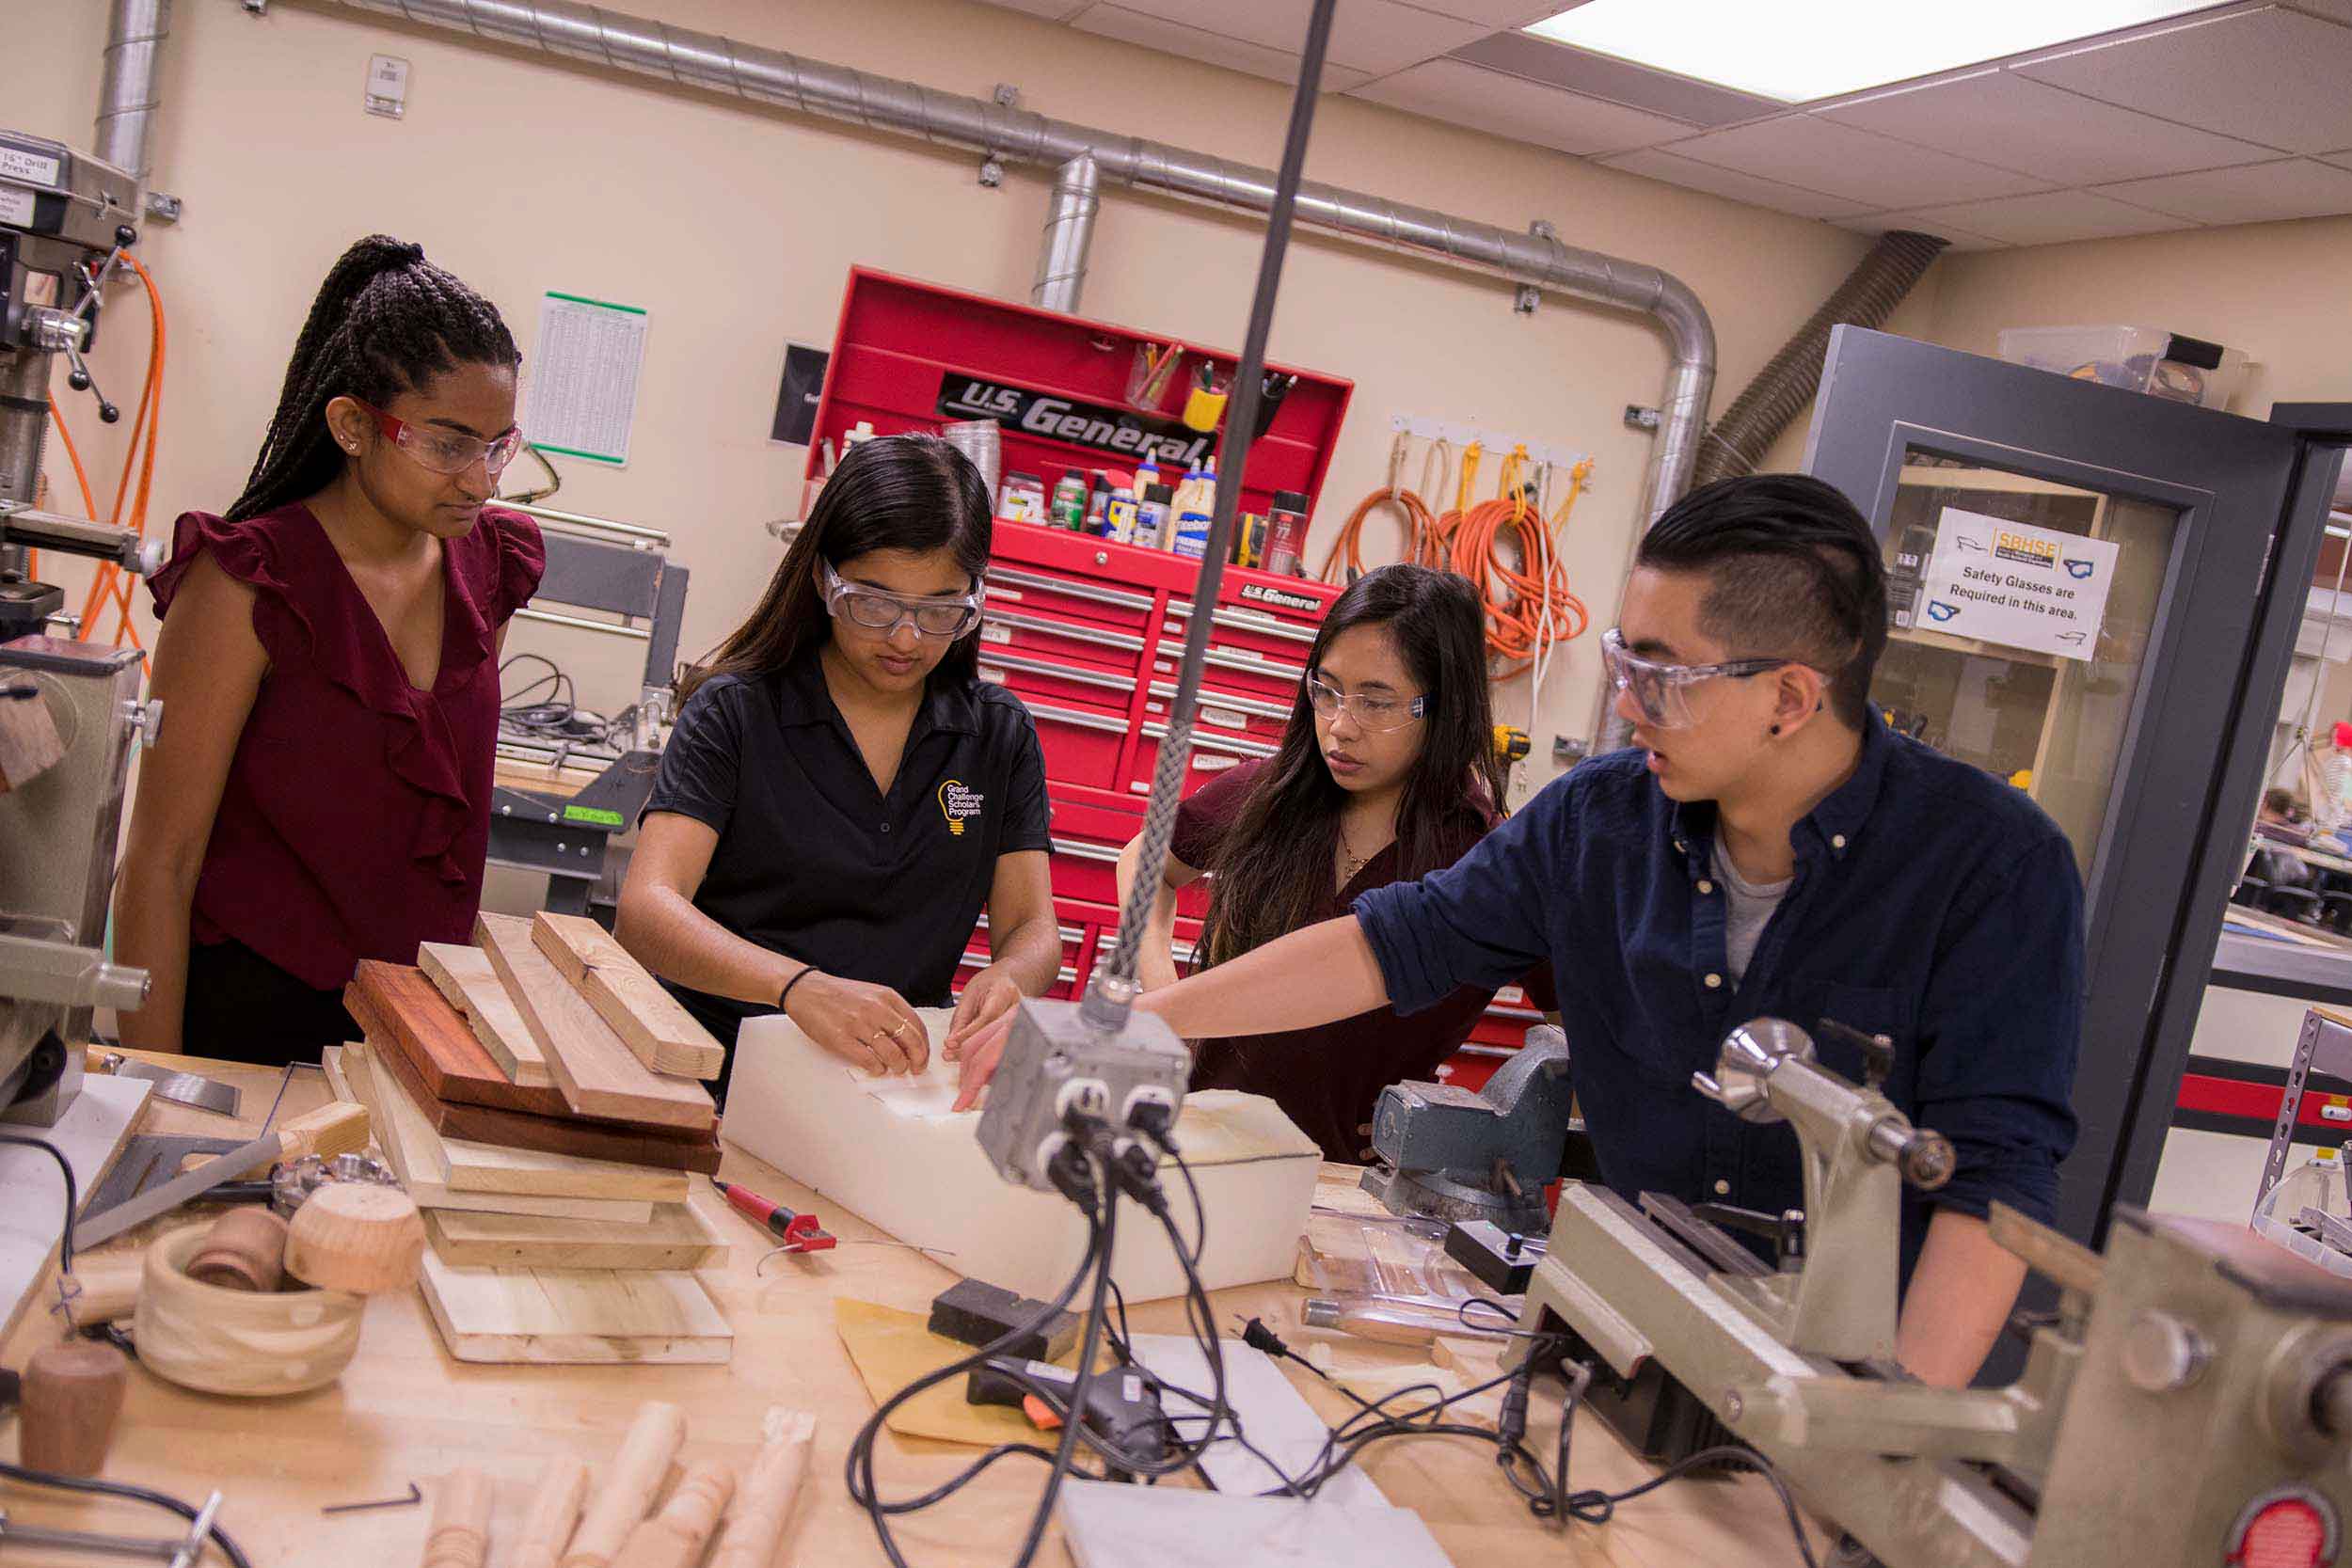 4 undergraduate students work in a research lab/workshop, surrounded by building tools and materials, creating a prototype